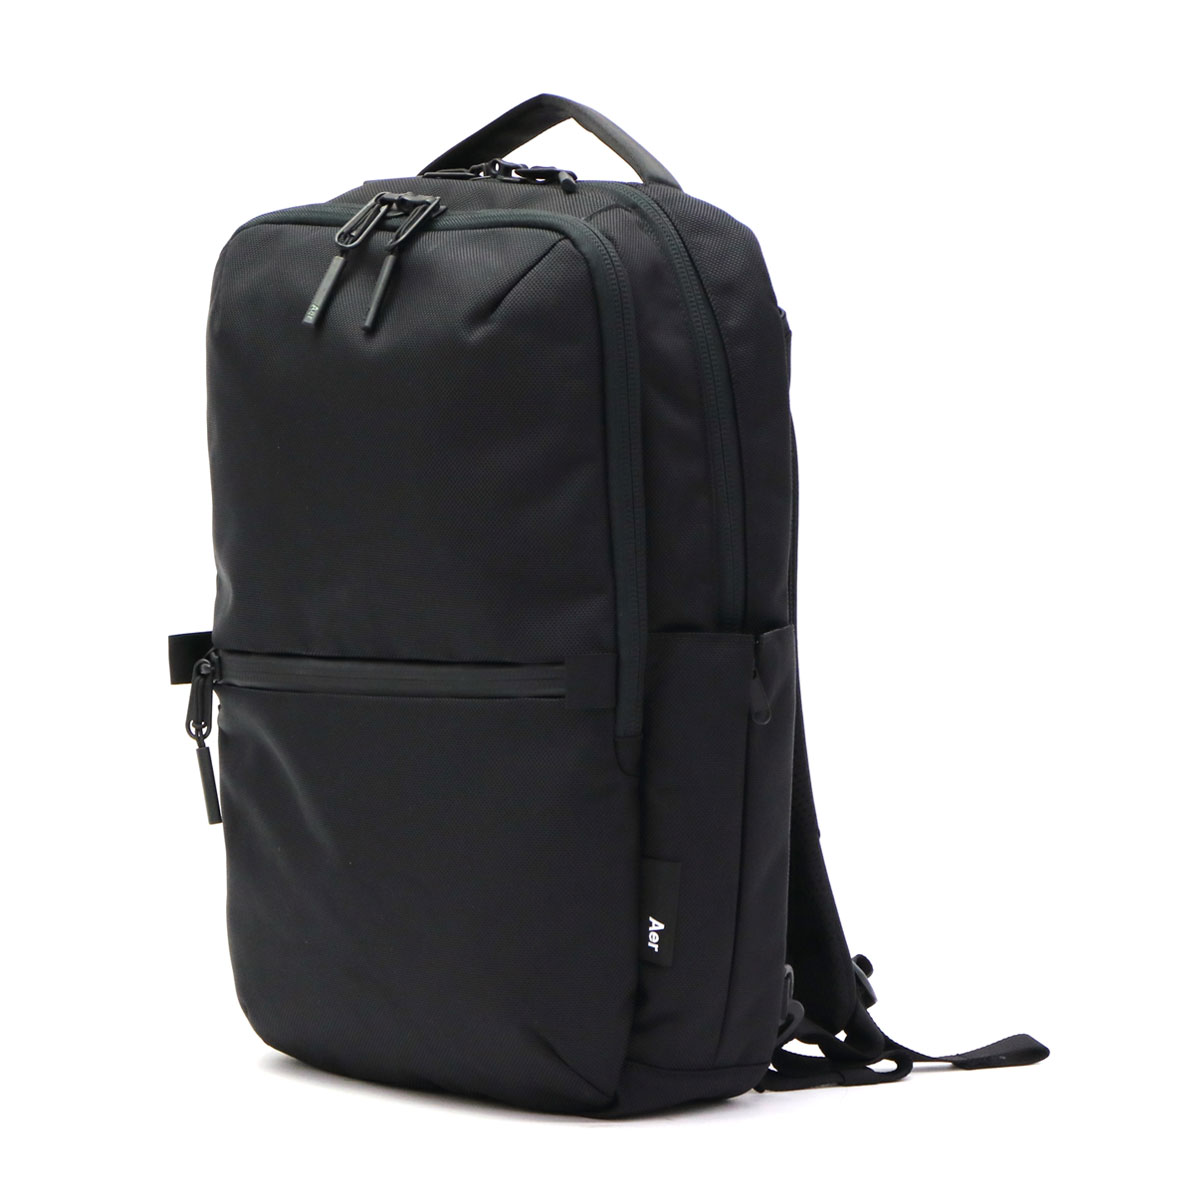 Aer エアー Travel Collection Flight Pack 2 3WAYバックパック